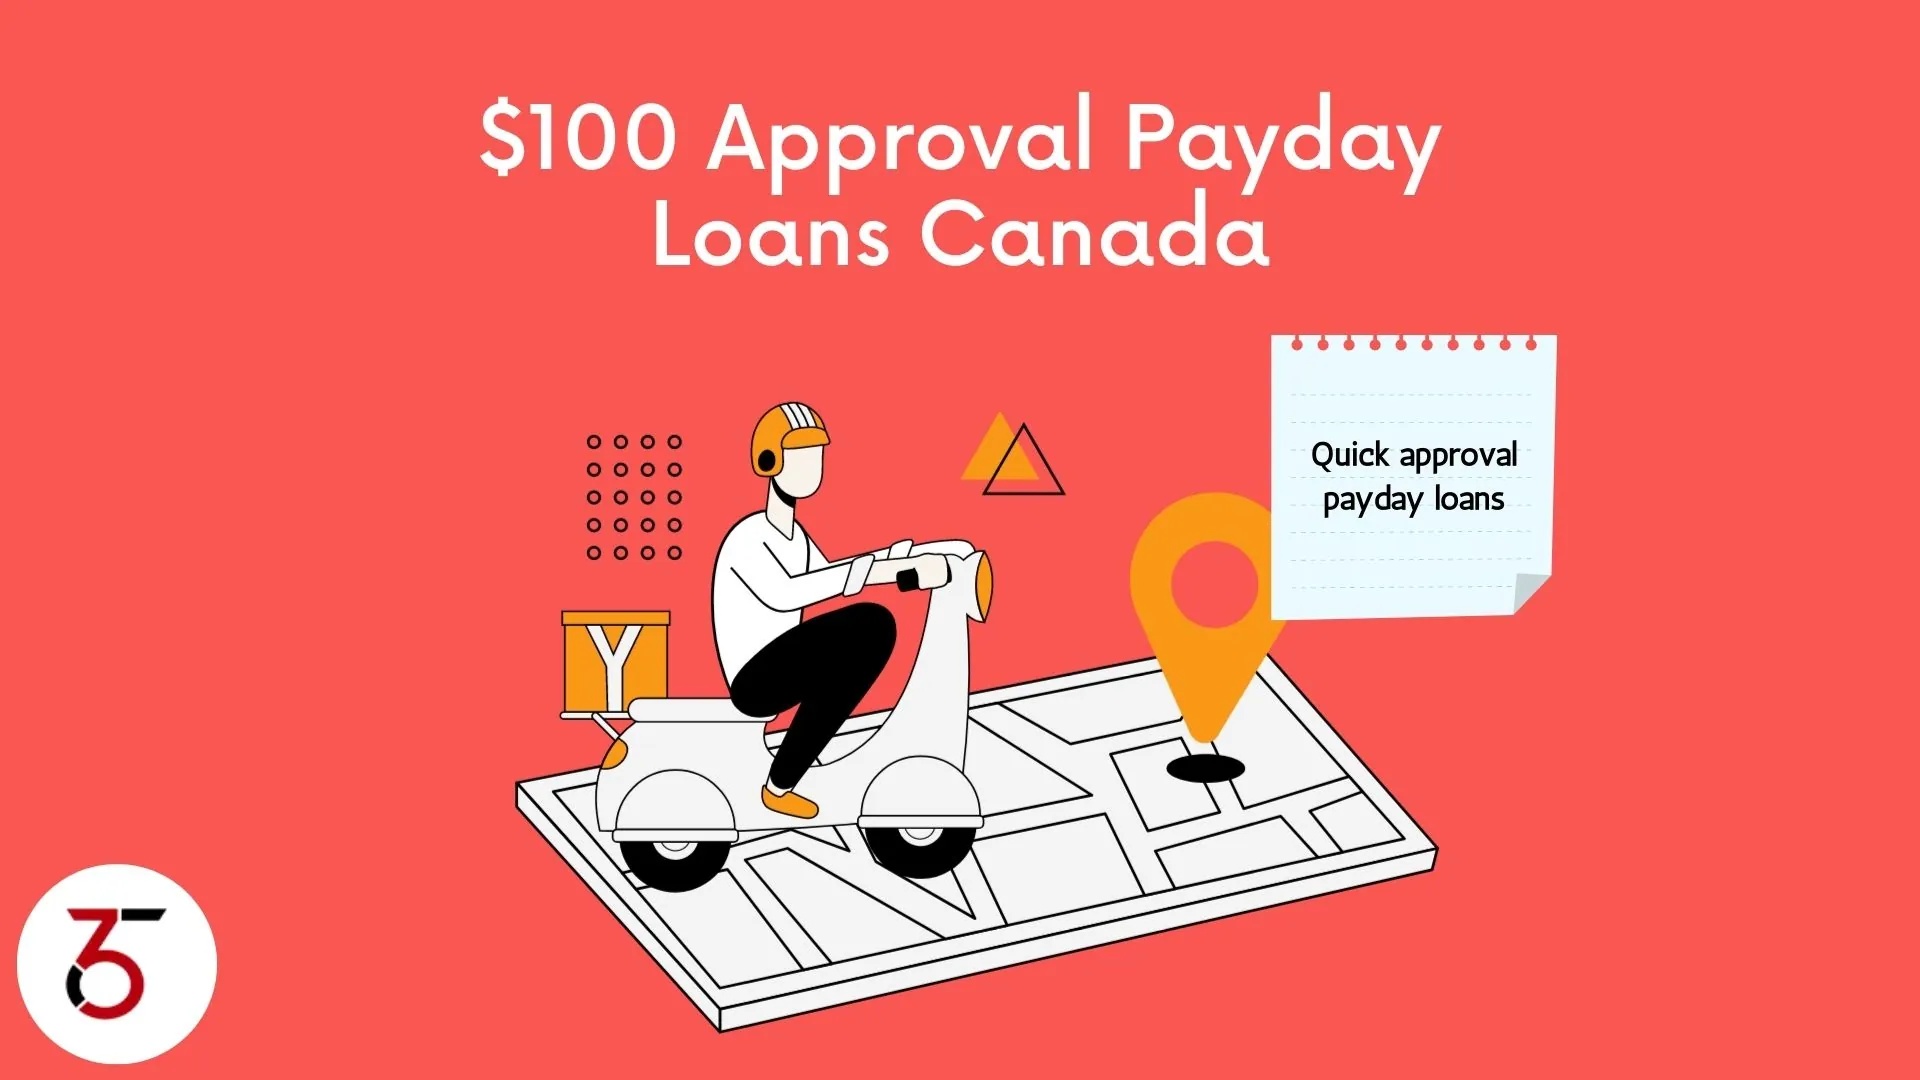 No More Waiting: Everyone Approved Loans Canada Can Help You Today